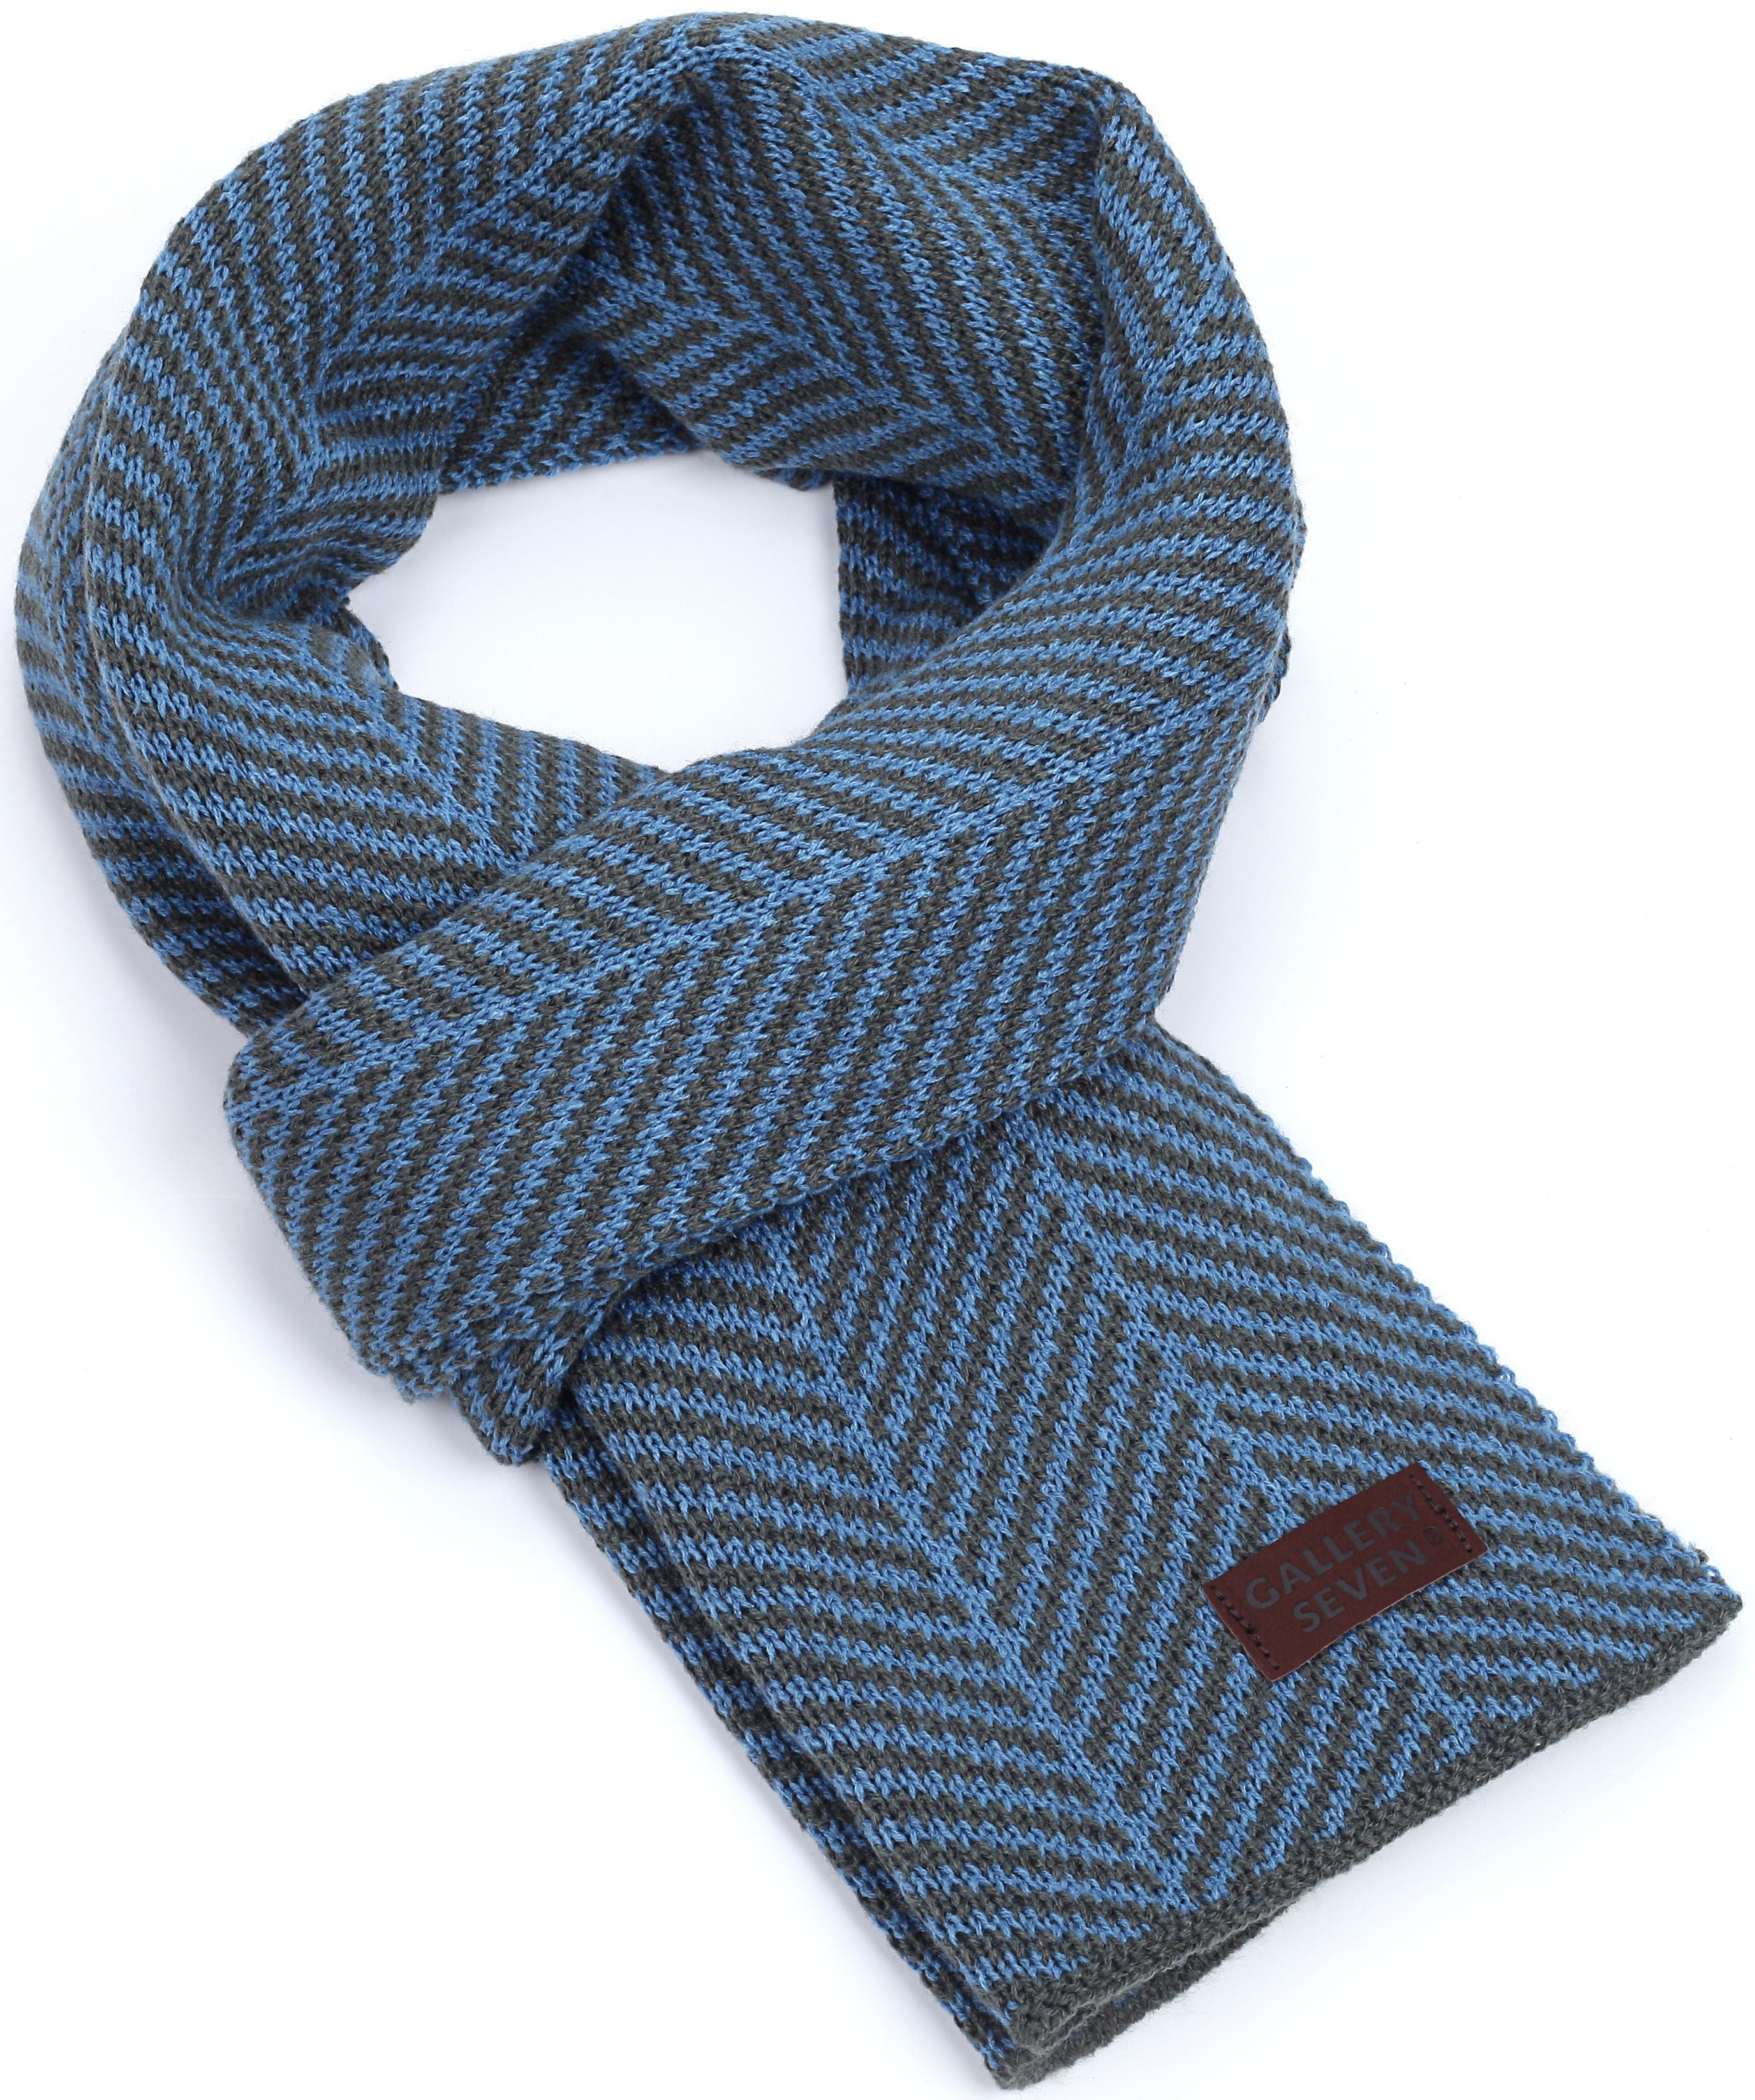 Soft Knit Scarve Gallery Seven Winter Scarf for Men in an Elegant Gift Box